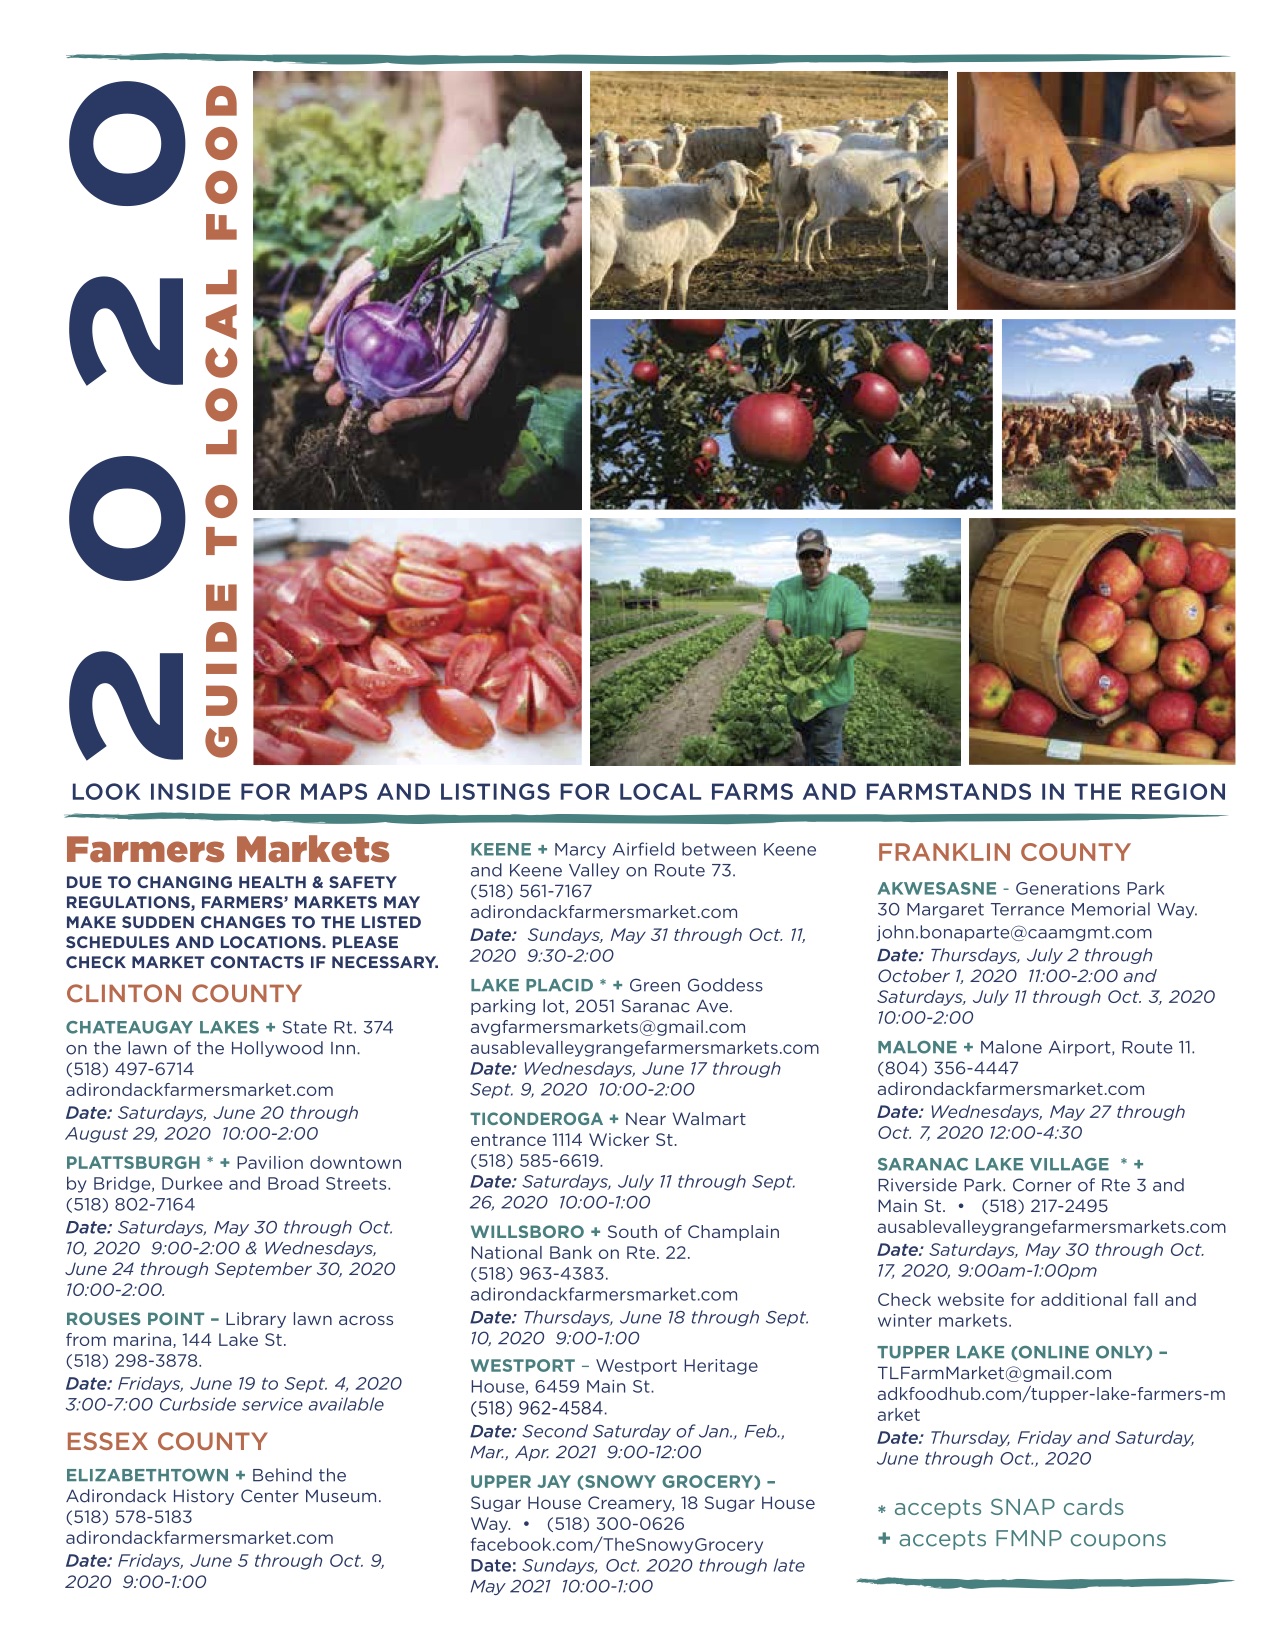 https://adirondackharvest.com/wp-content/uploads/2020/07/2020_tri-county-Food-Guide_by-page.jpg